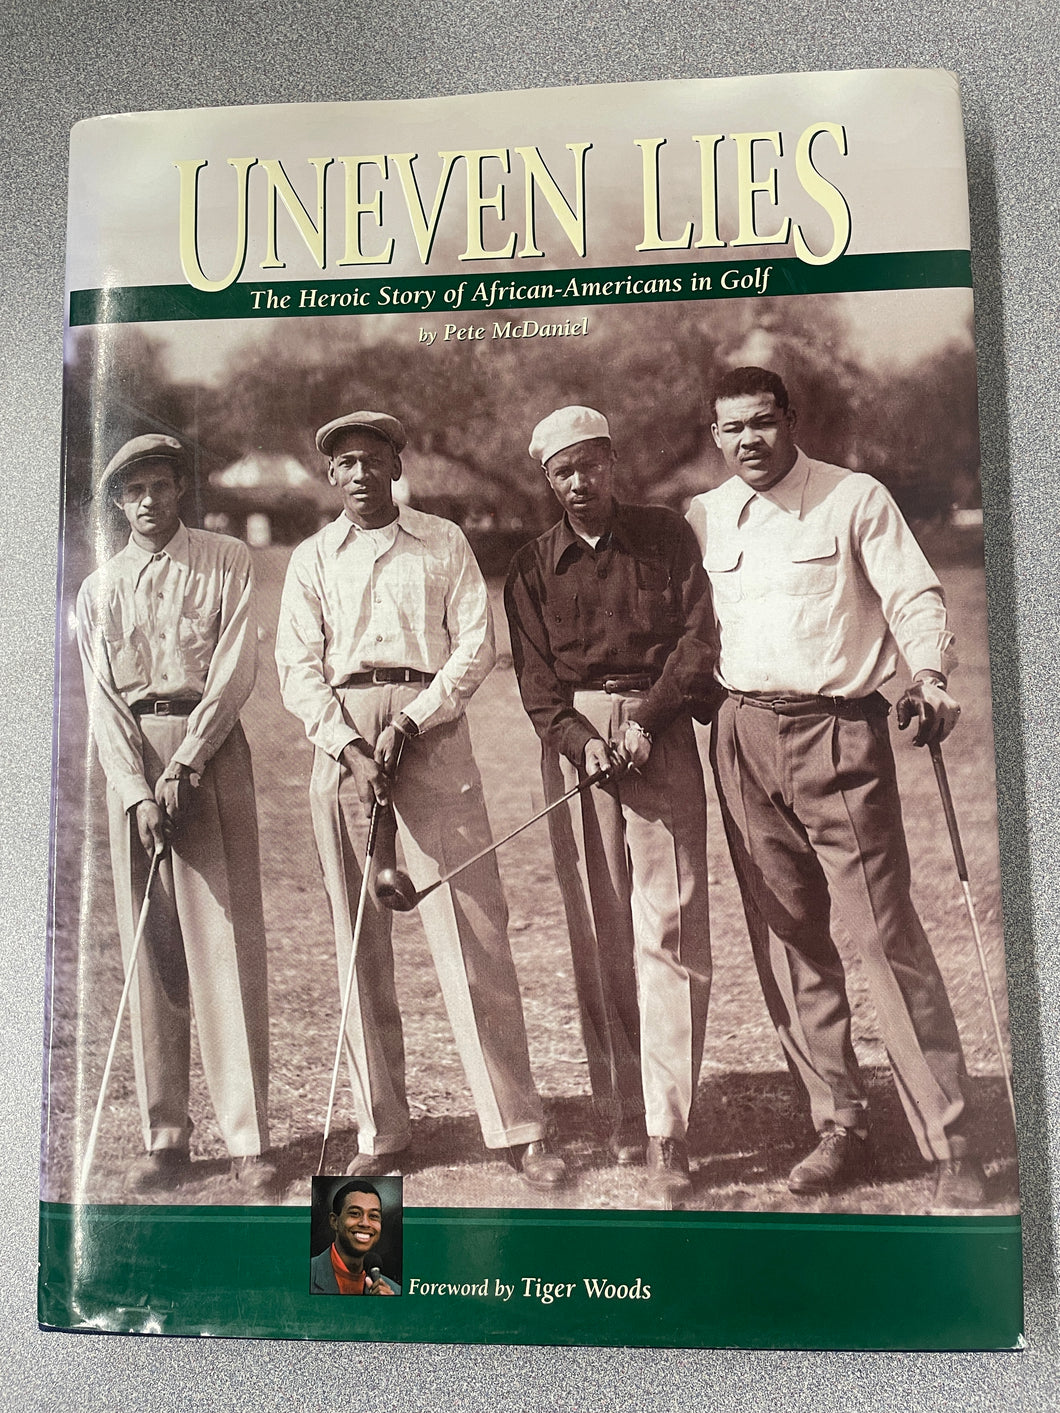 Uneven Lies: The Heroic Story of African-Americans in Golf, McDaniel, Pete [2005] OU 5/24